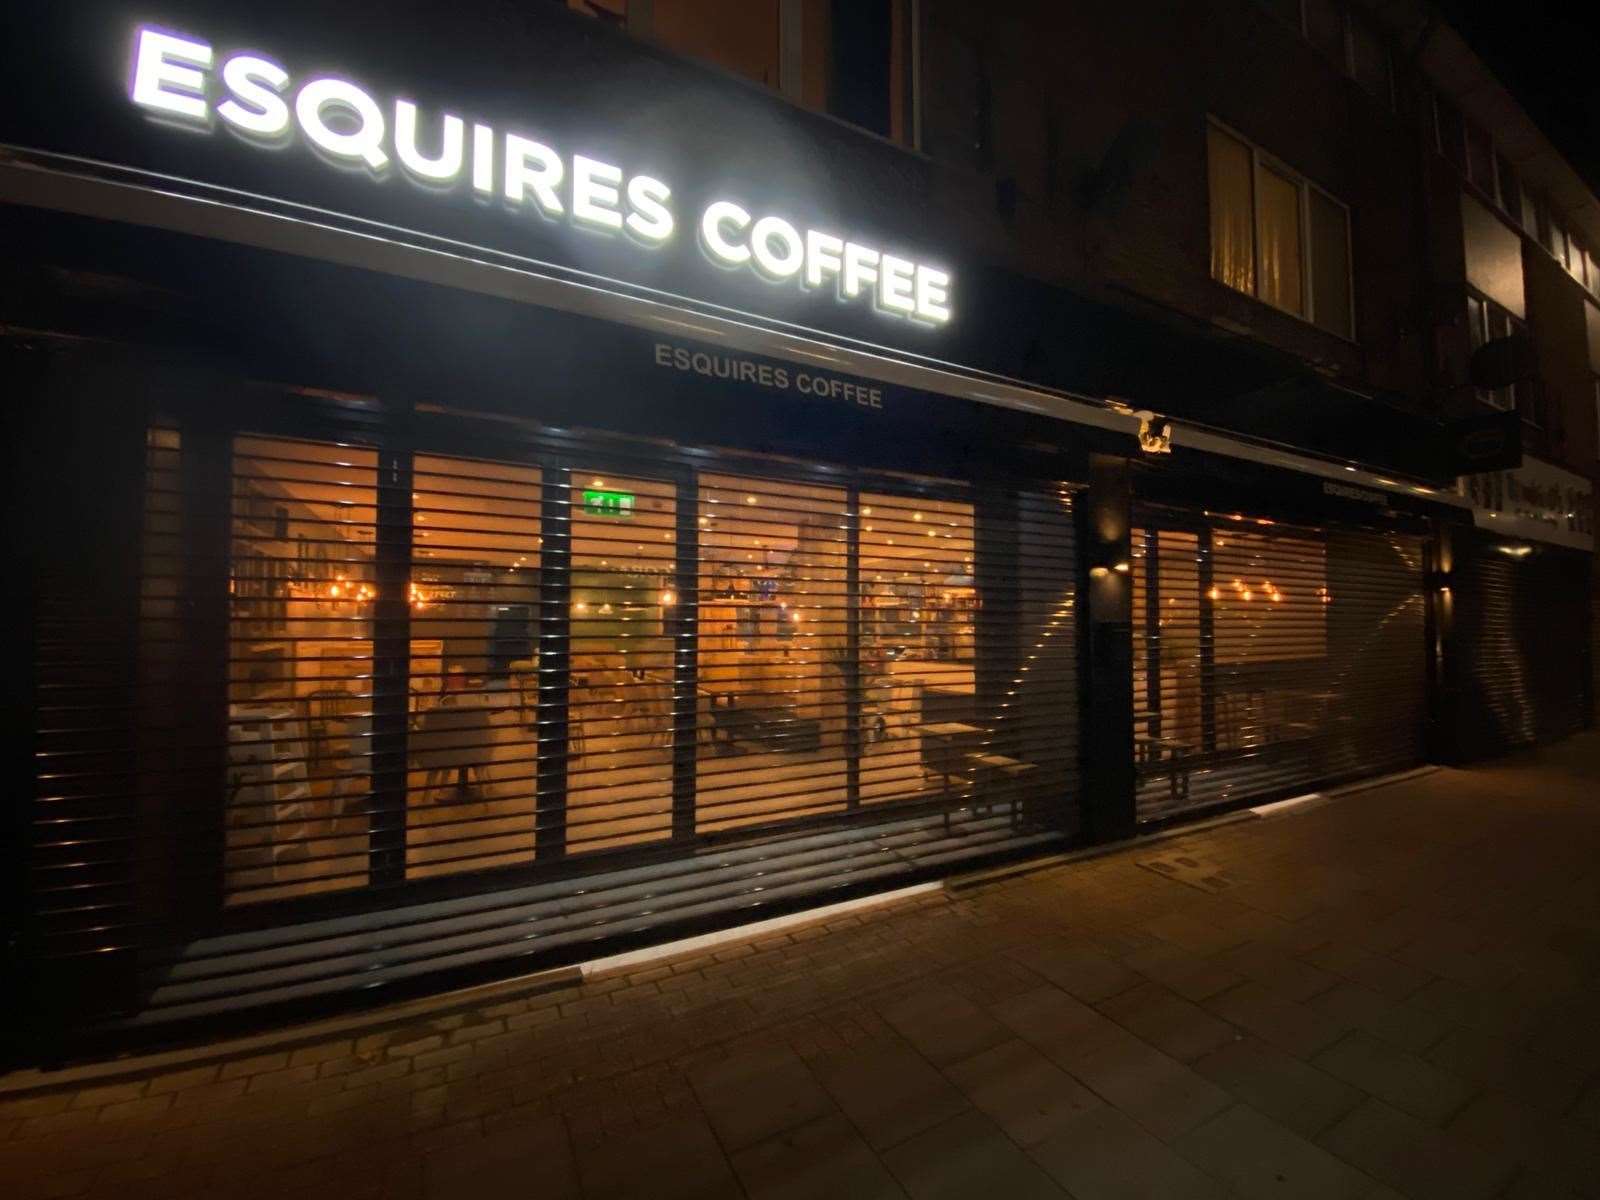 Esquires Coffee, which has branches in Dartford and Crayford, will remain closed under the latest lockdown